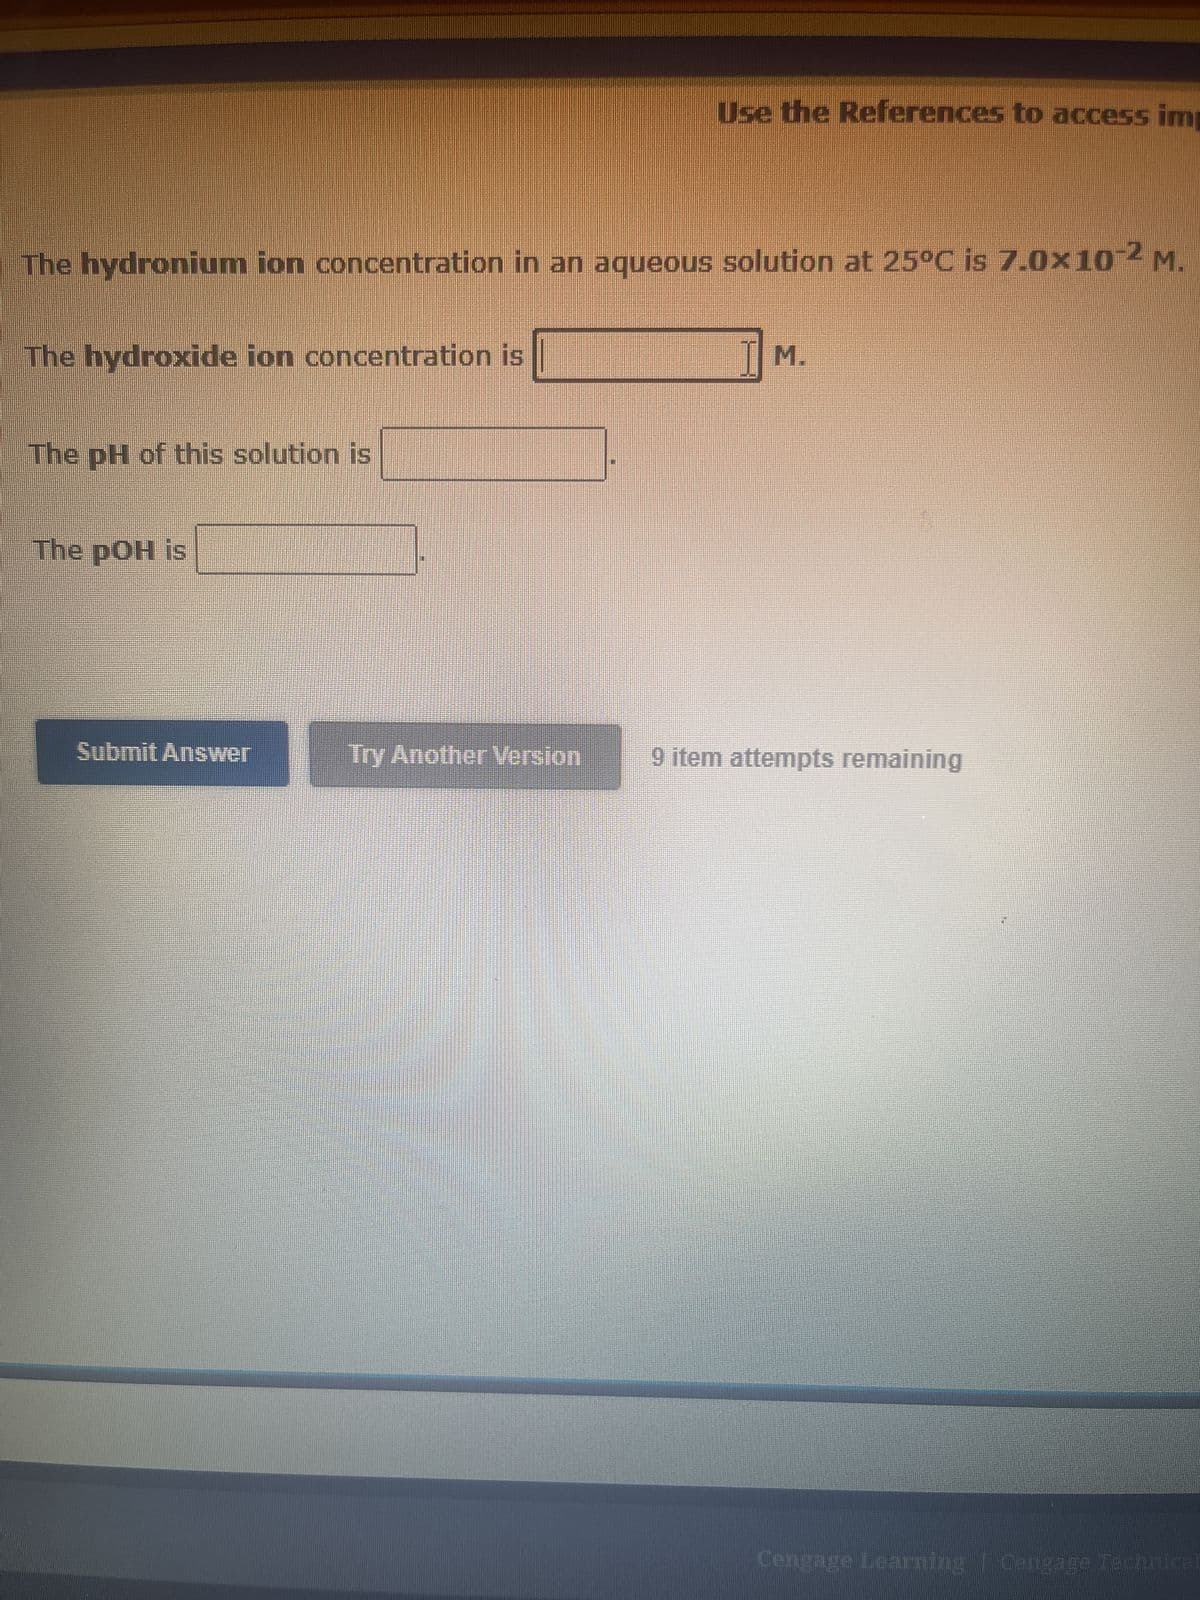 The hydronium ion concentration in an aqueous solution at 25°C is 7.0x10-2 M.
The hydroxide ion concentration is
The pH of this solution is
The pOH is
Submit Answer
Use the References to access imp
Try Another Version
M.
9 item attempts remaining
Cengage Learning | Cengage Technical